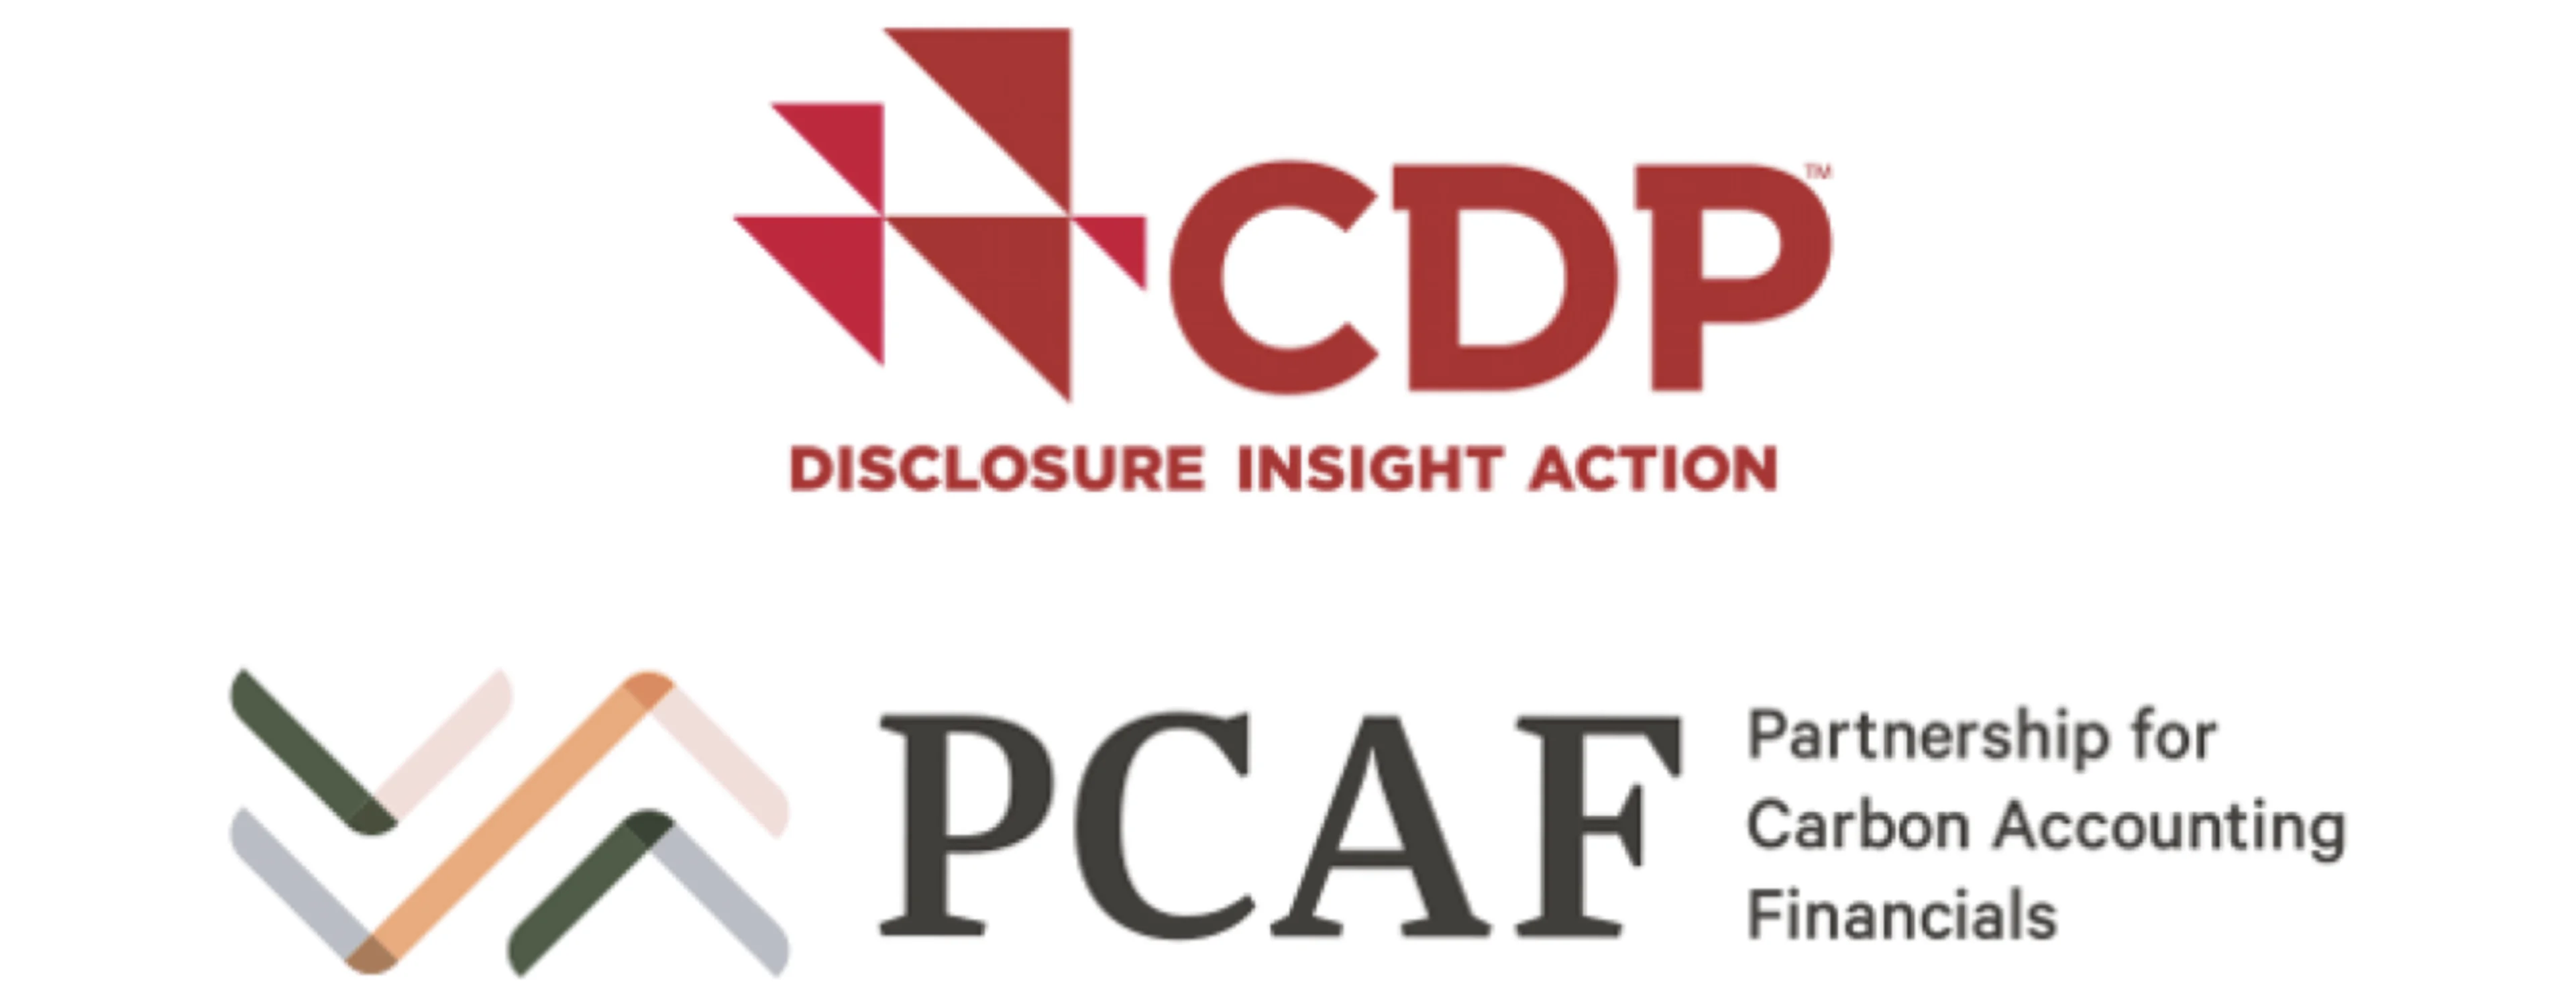 CDP and Partnership for Carbon Accounting Financials (PCAF)